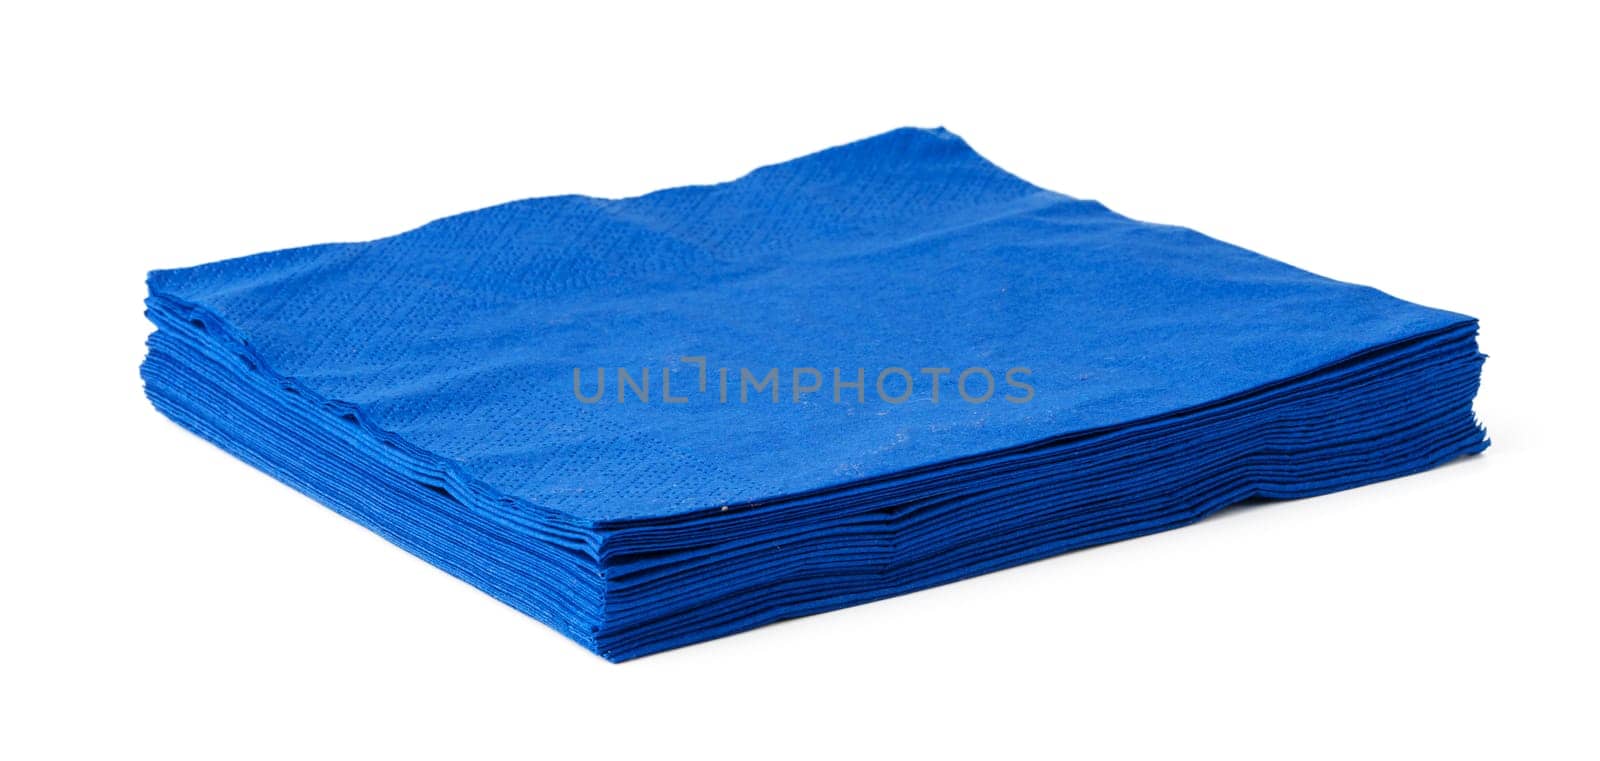 Stack of blue paper napkins on white background by Fabrikasimf